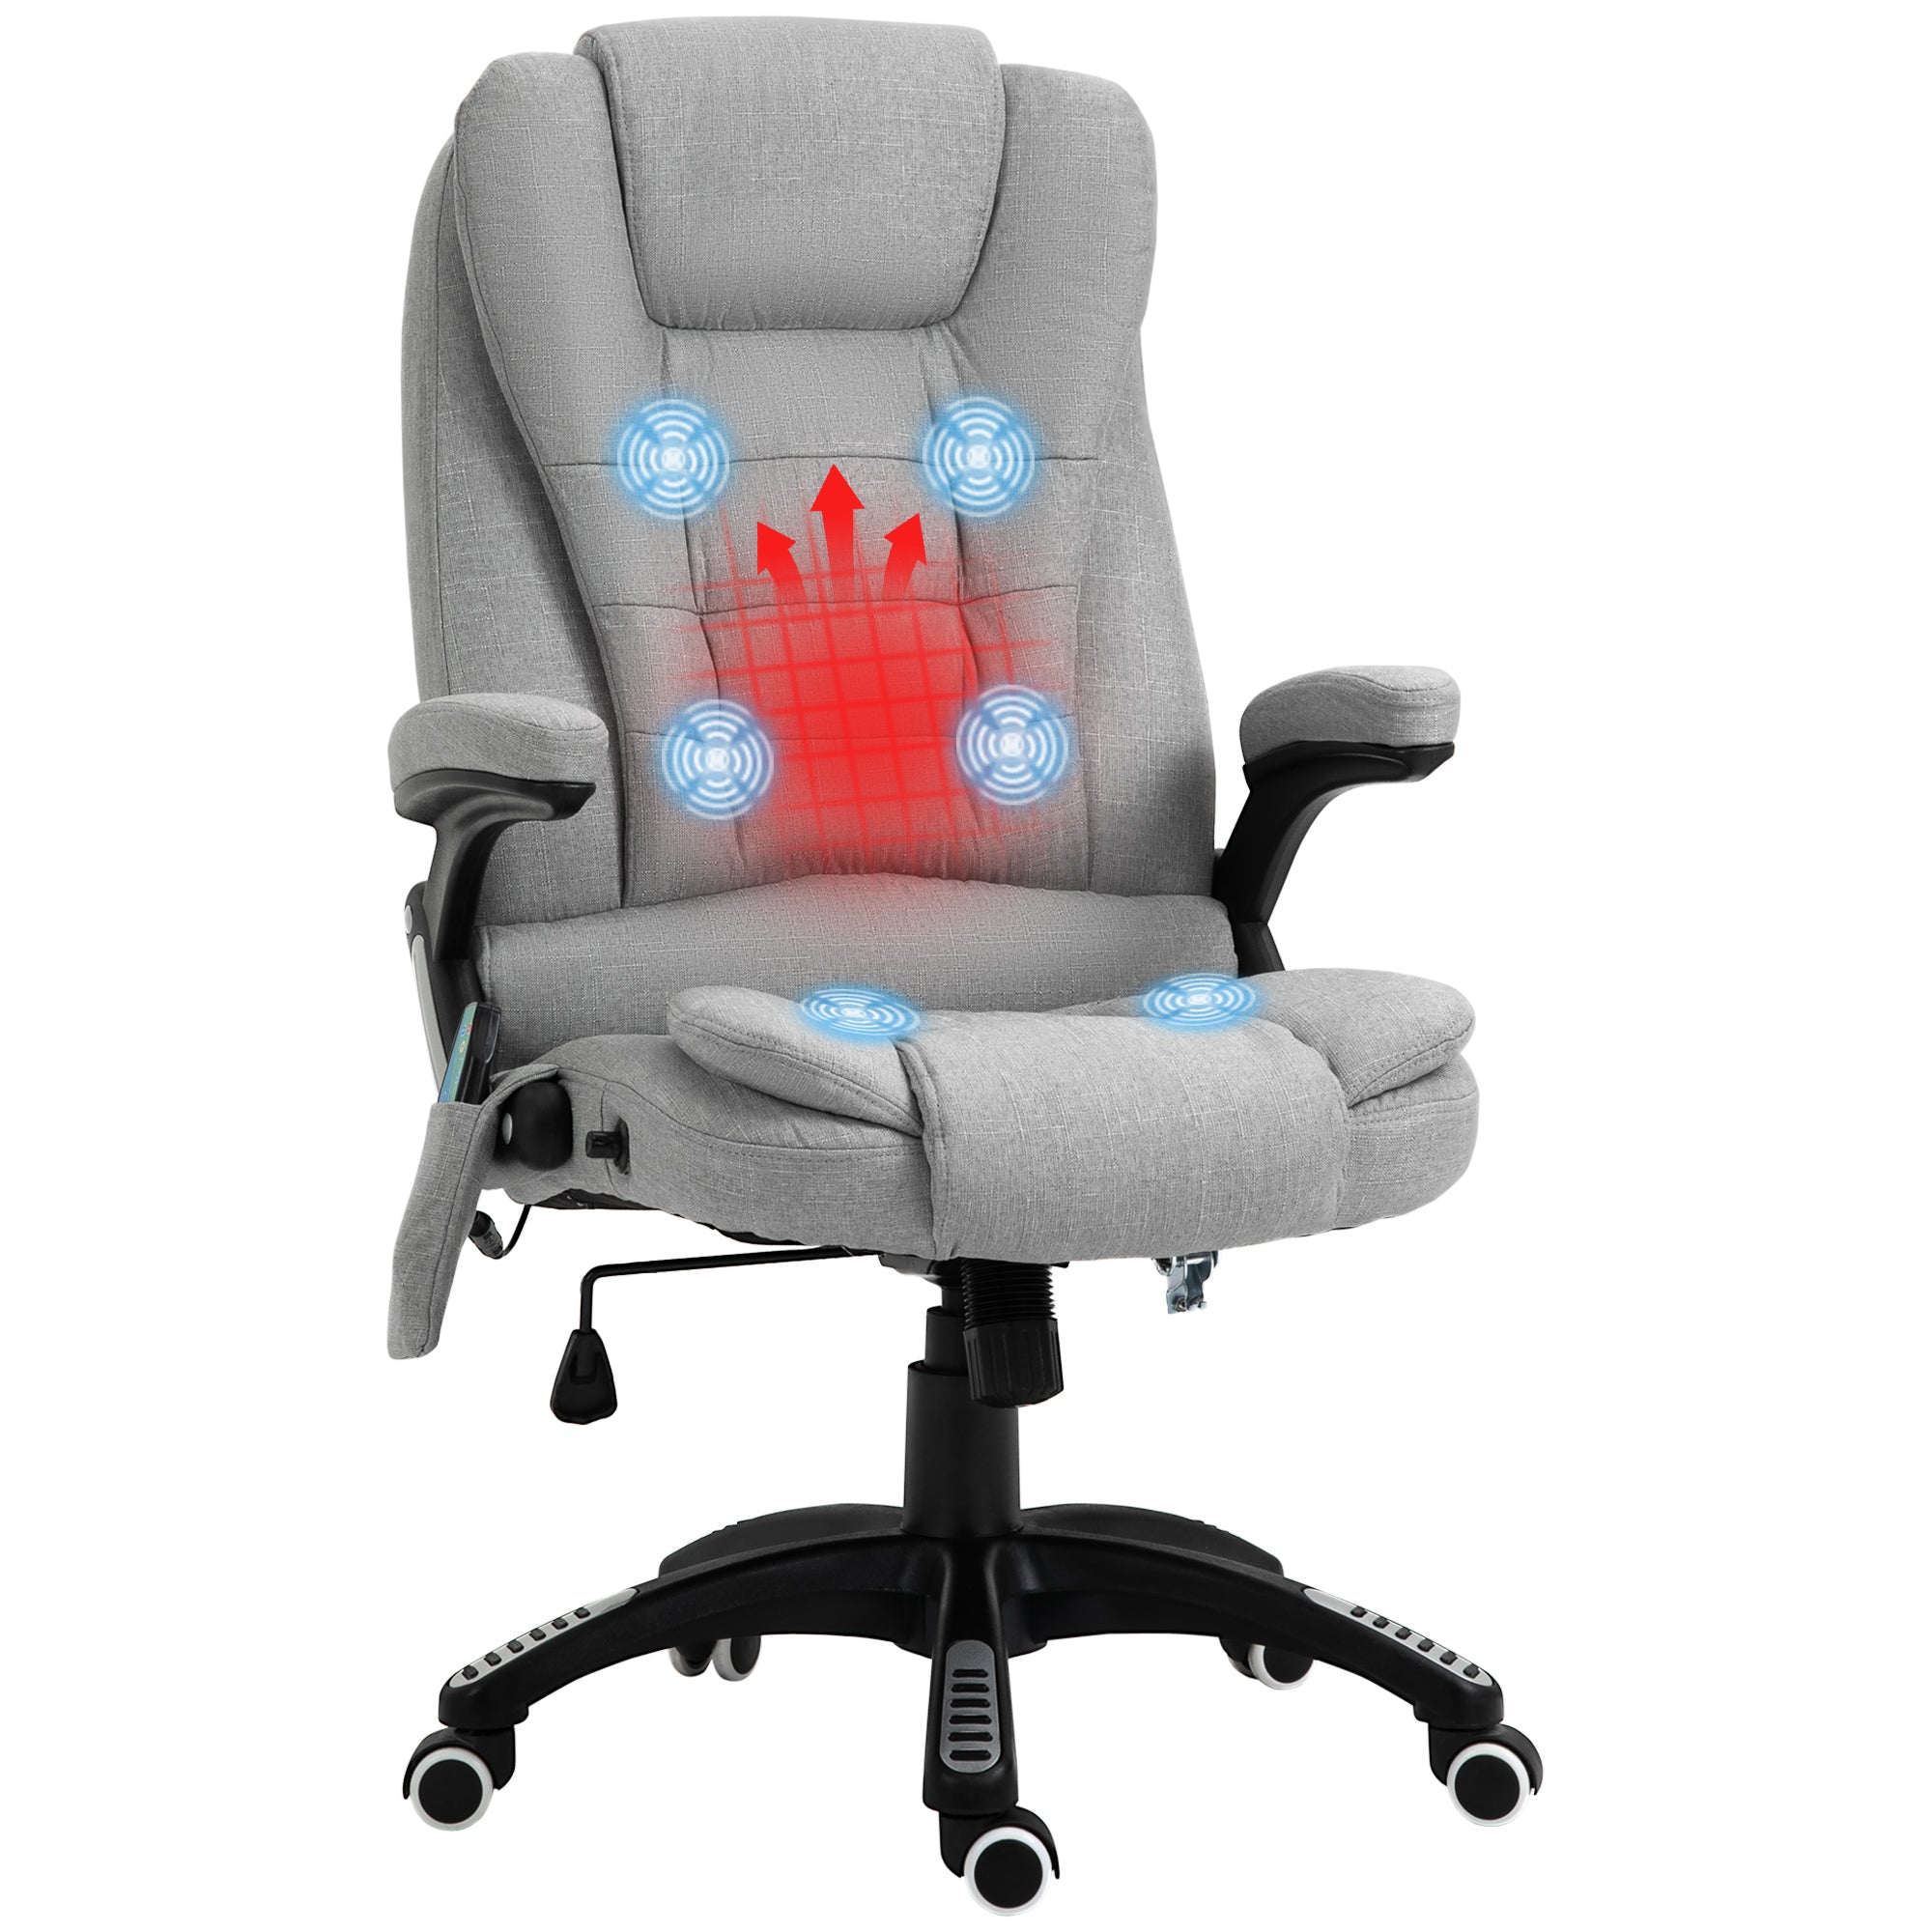 Vinsetto Office Chair w/ Heating Massage Points Relaxing Reclining Grey  | TJ Hughes